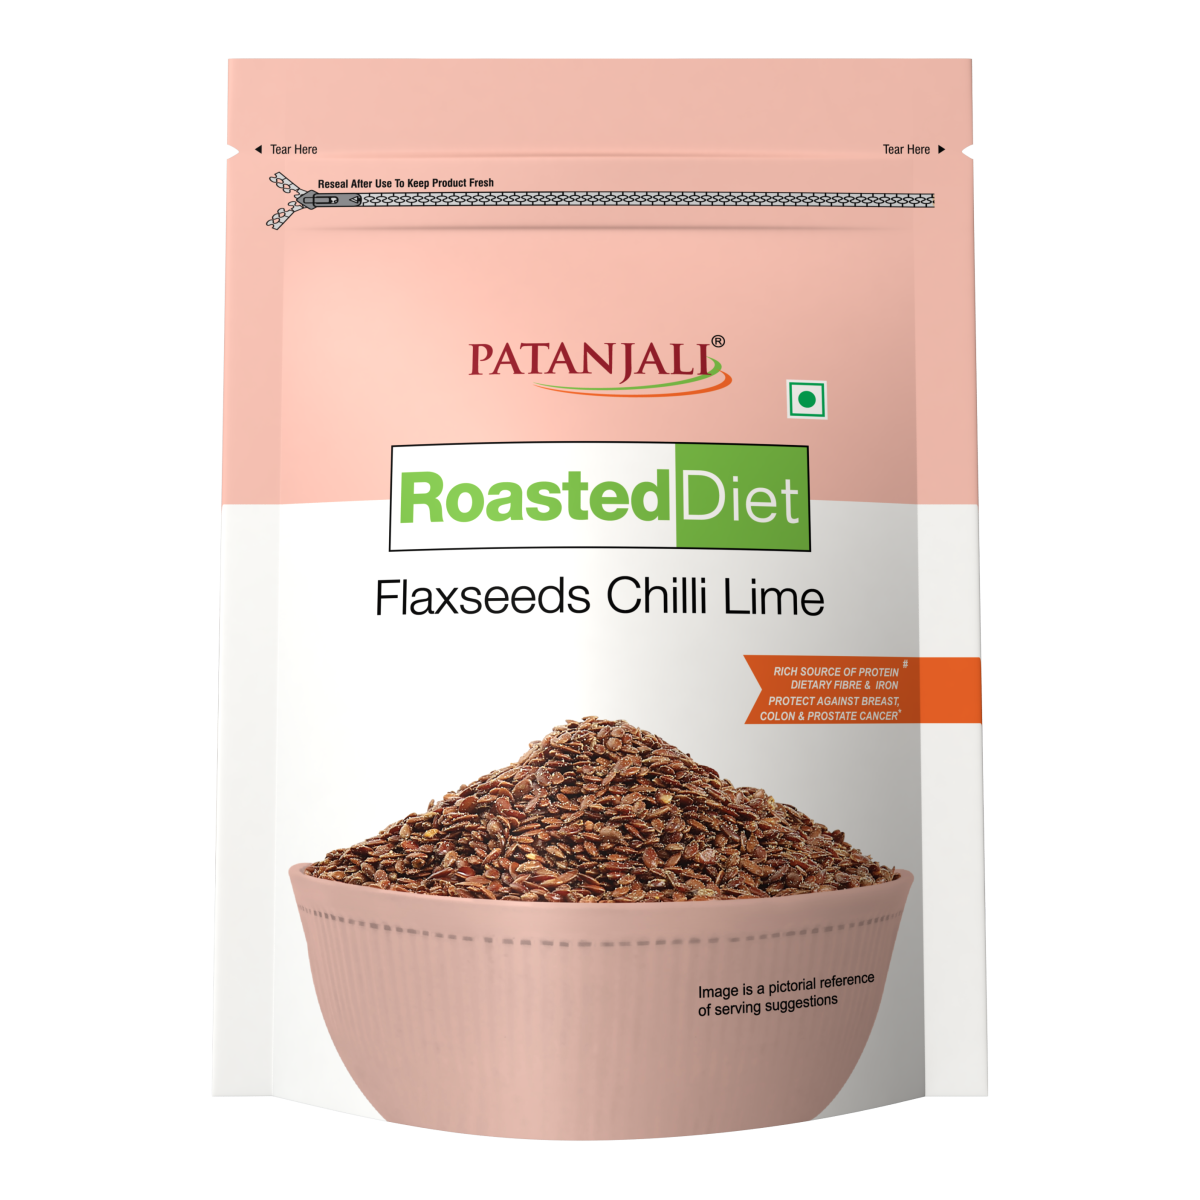 1690012018FlaxseedChilliLime150g1.png